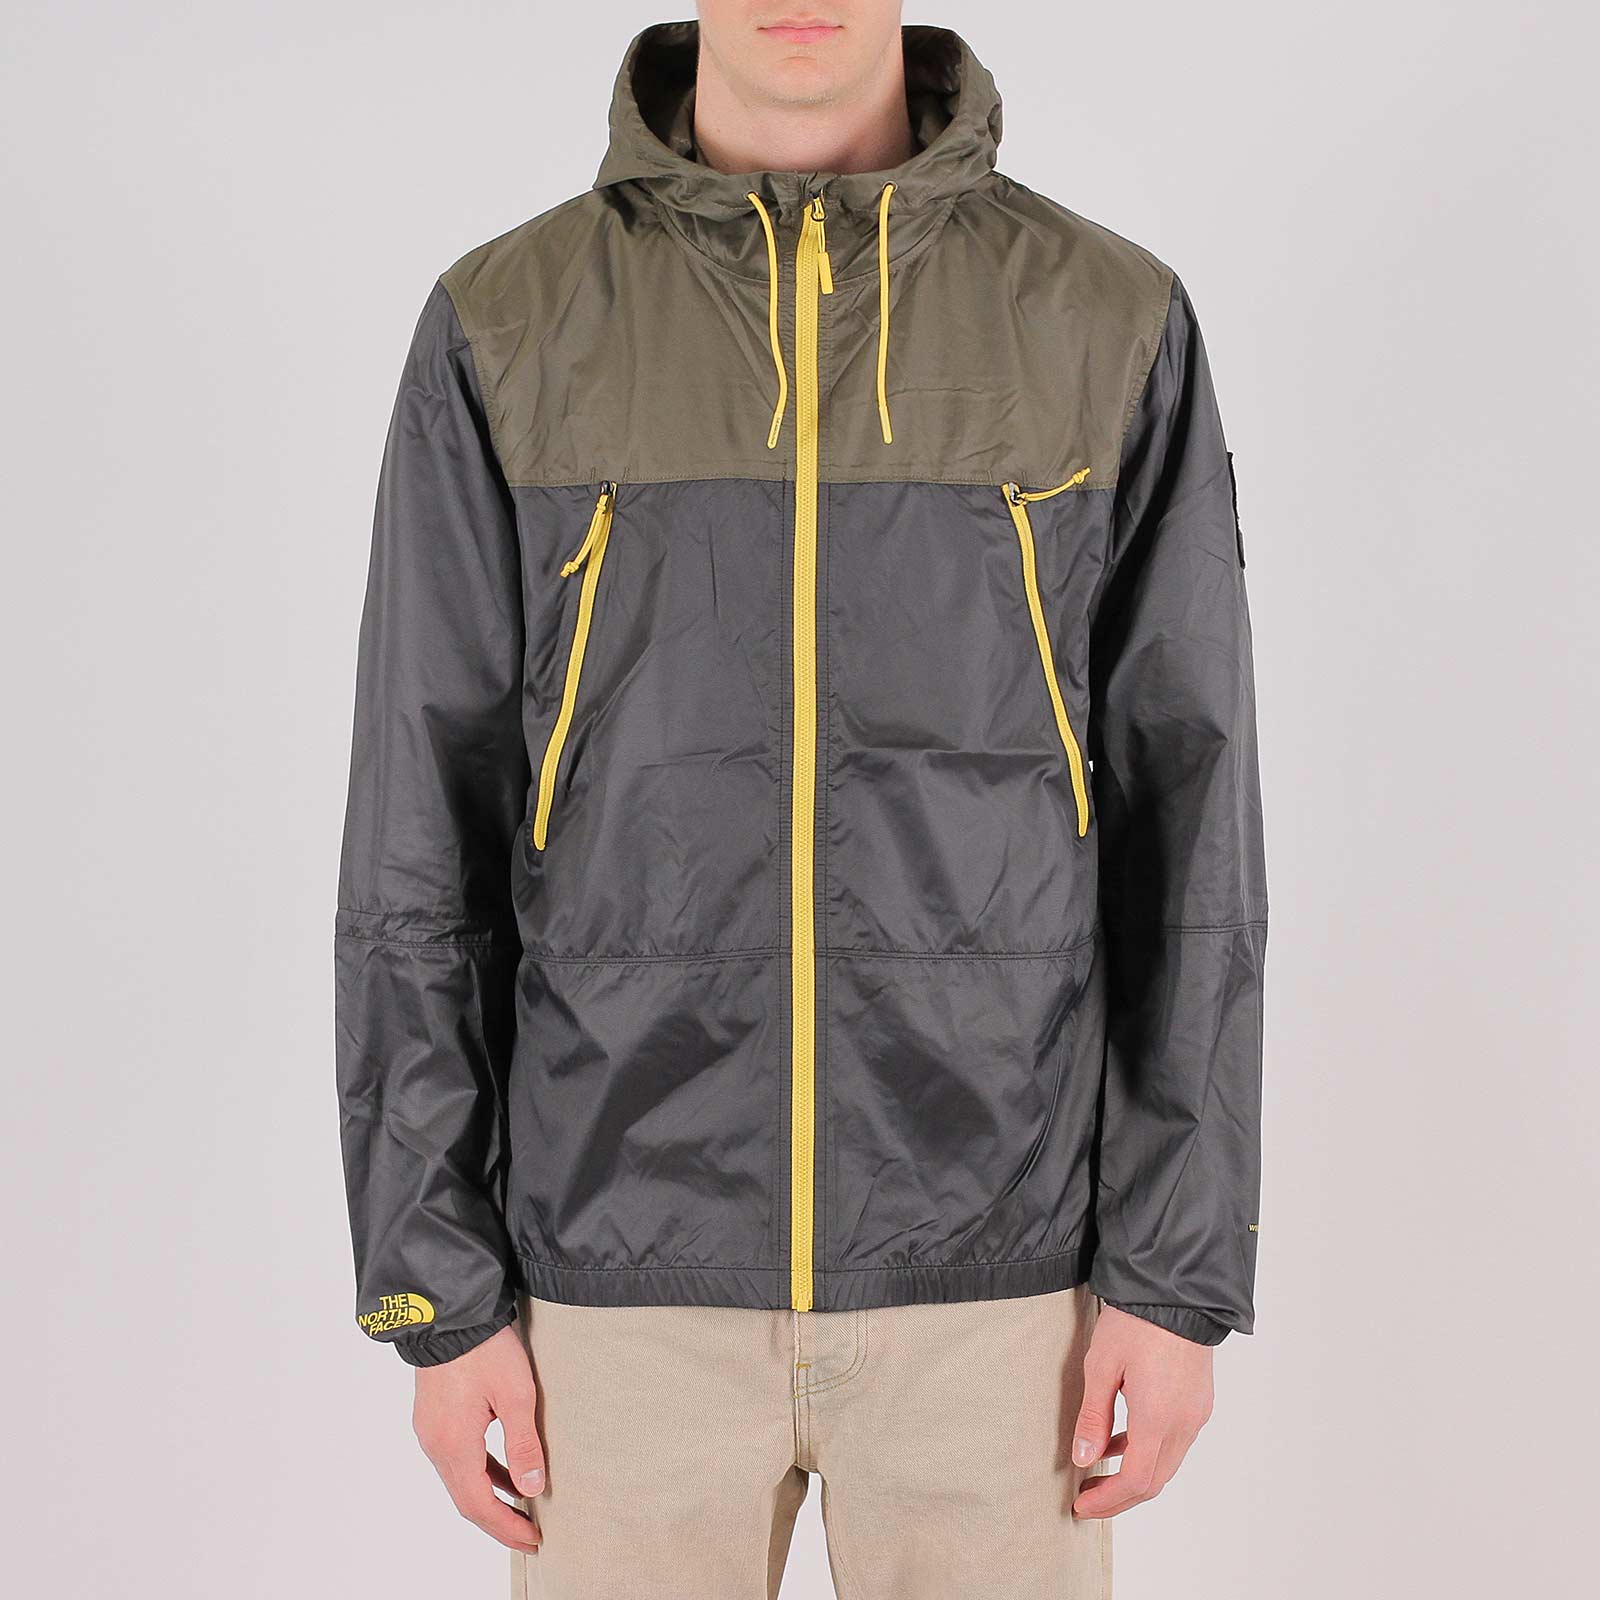 The North Face 1990 Seasonal Mountain Jacket Flash Sales, UP TO 65 